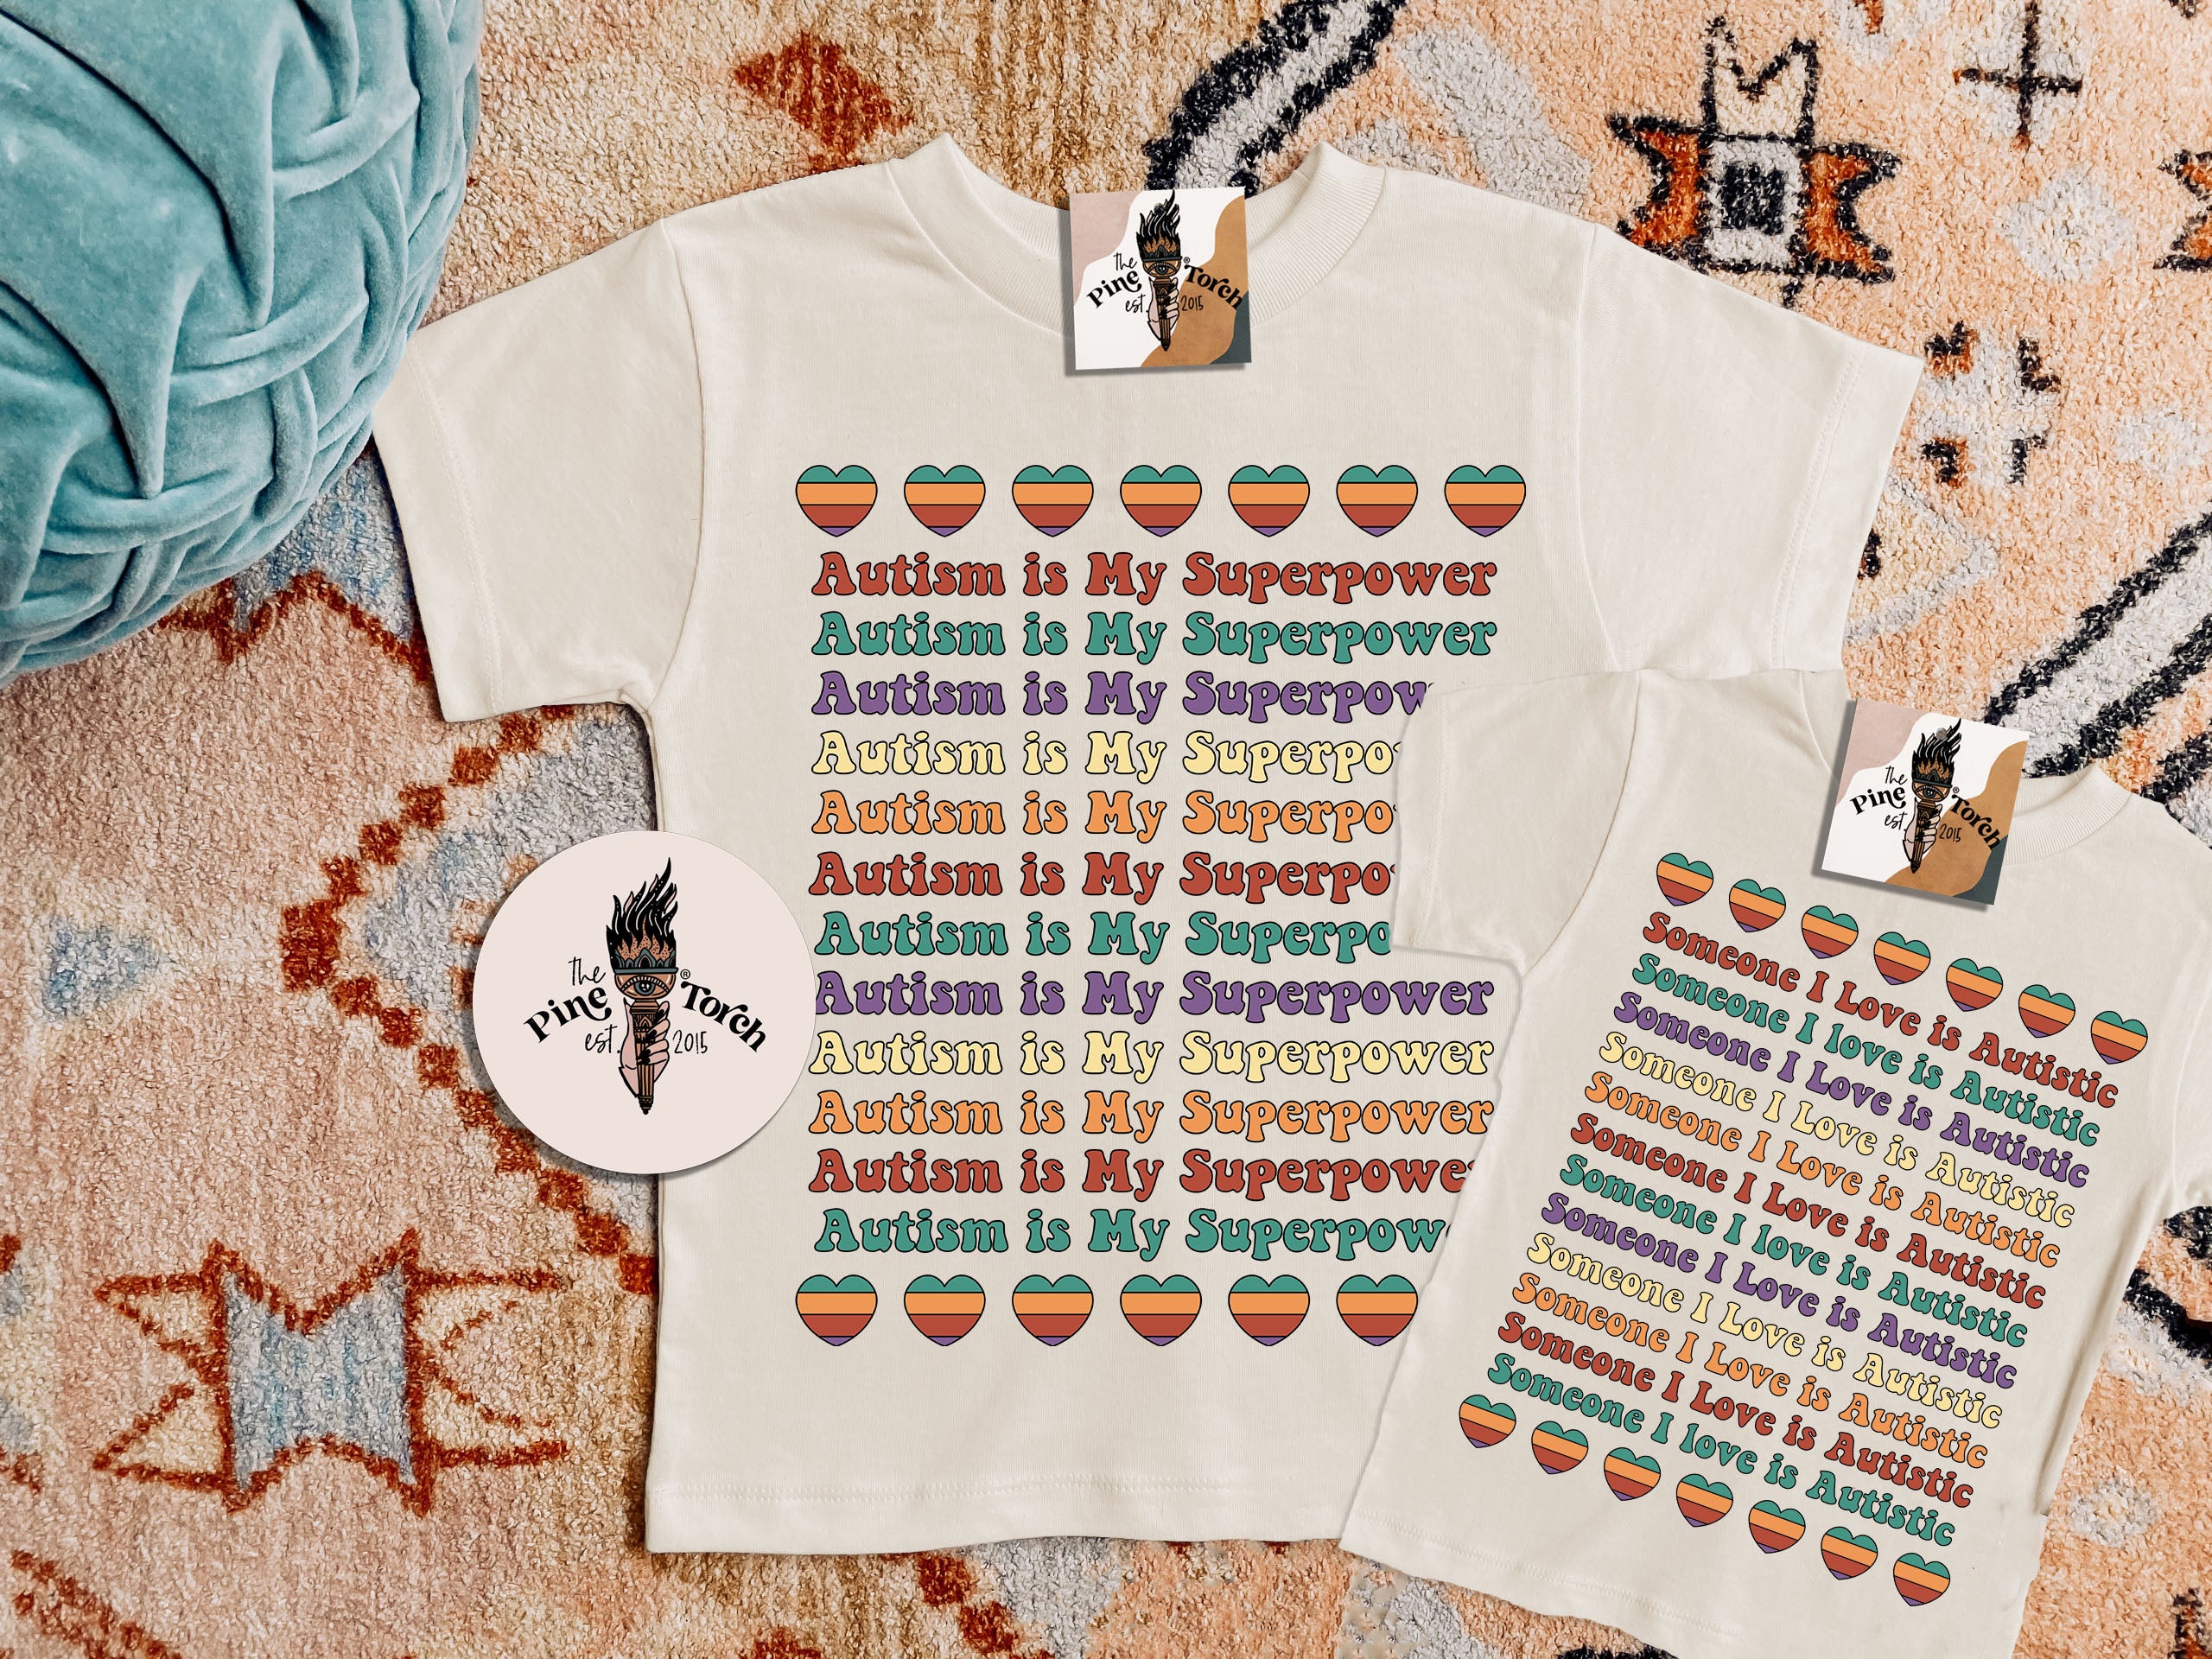 « AUTISM IS MY SUPER POWER » KIDS/YOUTH TEE